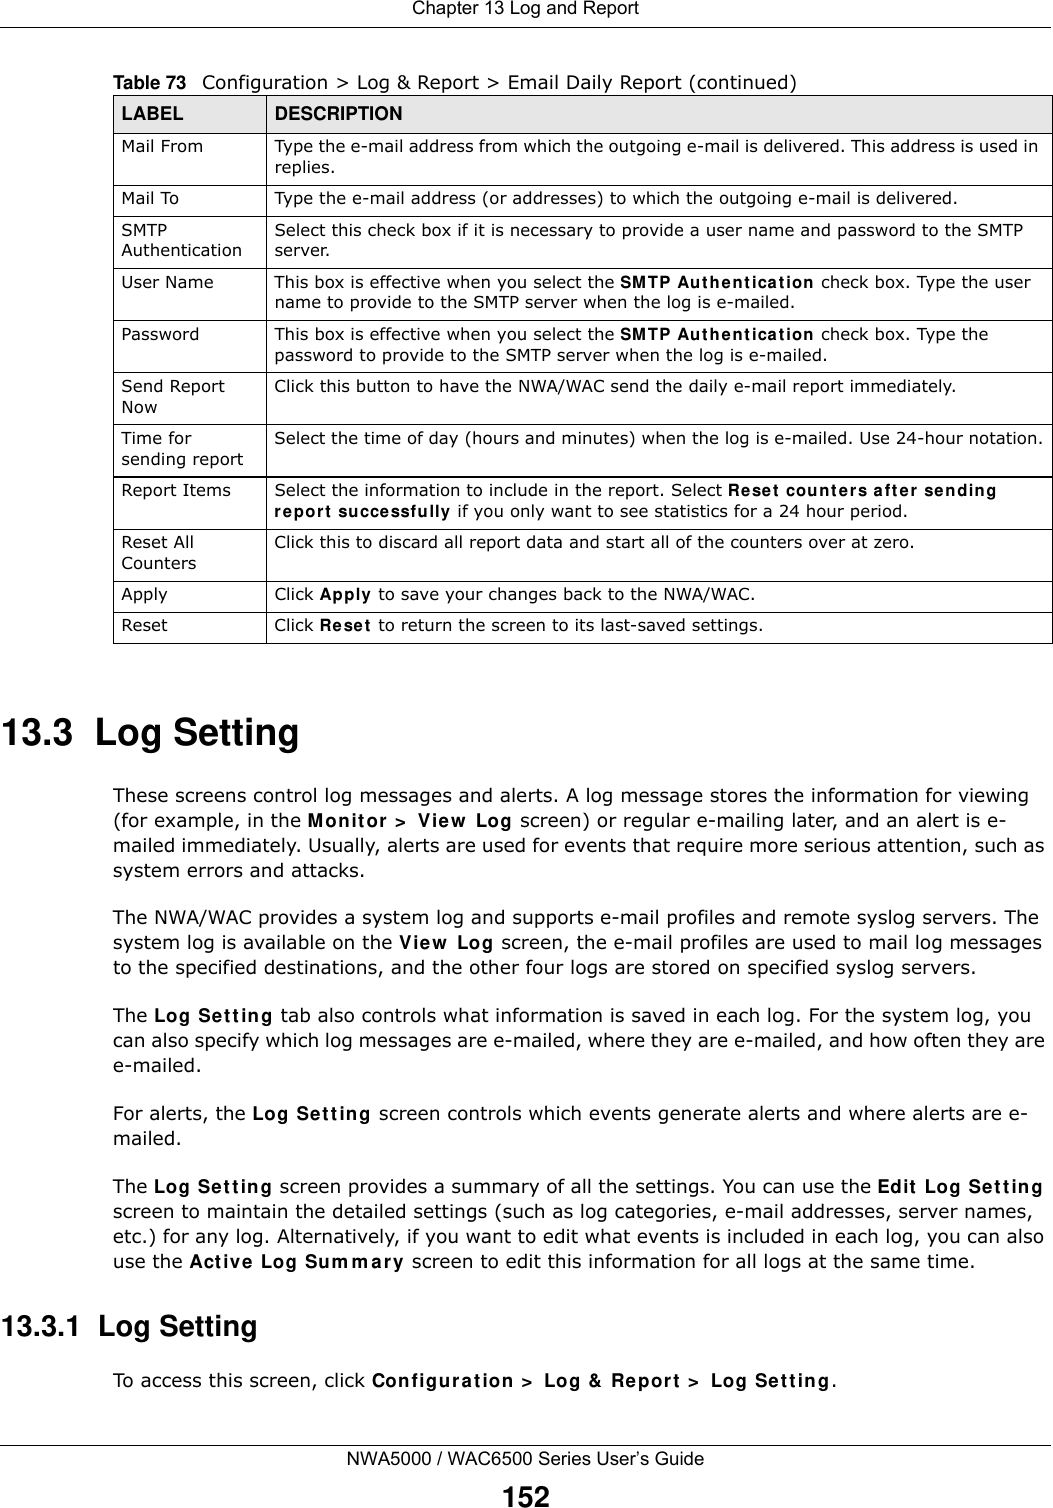 Chapter 13 Log and ReportNWA5000 / WAC6500 Series User’s Guide15213.3  Log Setting These screens control log messages and alerts. A log message stores the information for viewing (for example, in the Monit or &gt;  View  Log screen) or regular e-mailing later, and an alert is e-mailed immediately. Usually, alerts are used for events that require more serious attention, such as system errors and attacks.The NWA/WAC provides a system log and supports e-mail profiles and remote syslog servers. The system log is available on the Vie w  Log screen, the e-mail profiles are used to mail log messages to the specified destinations, and the other four logs are stored on specified syslog servers.The Log Set t in g tab also controls what information is saved in each log. For the system log, you can also specify which log messages are e-mailed, where they are e-mailed, and how often they are e-mailed.For alerts, the Log Se t ting screen controls which events generate alerts and where alerts are e-mailed.The Log Se tt ing screen provides a summary of all the settings. You can use the Ed it  Log Set t ing screen to maintain the detailed settings (such as log categories, e-mail addresses, server names, etc.) for any log. Alternatively, if you want to edit what events is included in each log, you can also use the Act iv e Log Su m m ar y screen to edit this information for all logs at the same time.13.3.1  Log SettingTo access this screen, click Configur at ion &gt;  Log &amp;  Report &gt;  Log Set t ing.Mail From Type the e-mail address from which the outgoing e-mail is delivered. This address is used in replies.Mail To Type the e-mail address (or addresses) to which the outgoing e-mail is delivered.SMTP AuthenticationSelect this check box if it is necessary to provide a user name and password to the SMTP server.User Name This box is effective when you select the SM TP Authenticat ion check box. Type the user name to provide to the SMTP server when the log is e-mailed.Password This box is effective when you select the SM TP Authenticat ion check box. Type the password to provide to the SMTP server when the log is e-mailed.Send Report NowClick this button to have the NWA/WAC send the daily e-mail report immediately.Time for sending reportSelect the time of day (hours and minutes) when the log is e-mailed. Use 24-hour notation.Report Items Select the information to include in the report. Select Re se t  cou n t ers a ft e r sending repor t successfully if you only want to see statistics for a 24 hour period.Reset All CountersClick this to discard all report data and start all of the counters over at zero. Apply Click Apply to save your changes back to the NWA/WAC.Reset Click Re se t  to return the screen to its last-saved settings. Table 73   Configuration &gt; Log &amp; Report &gt; Email Daily Report (continued)LABEL DESCRIPTION